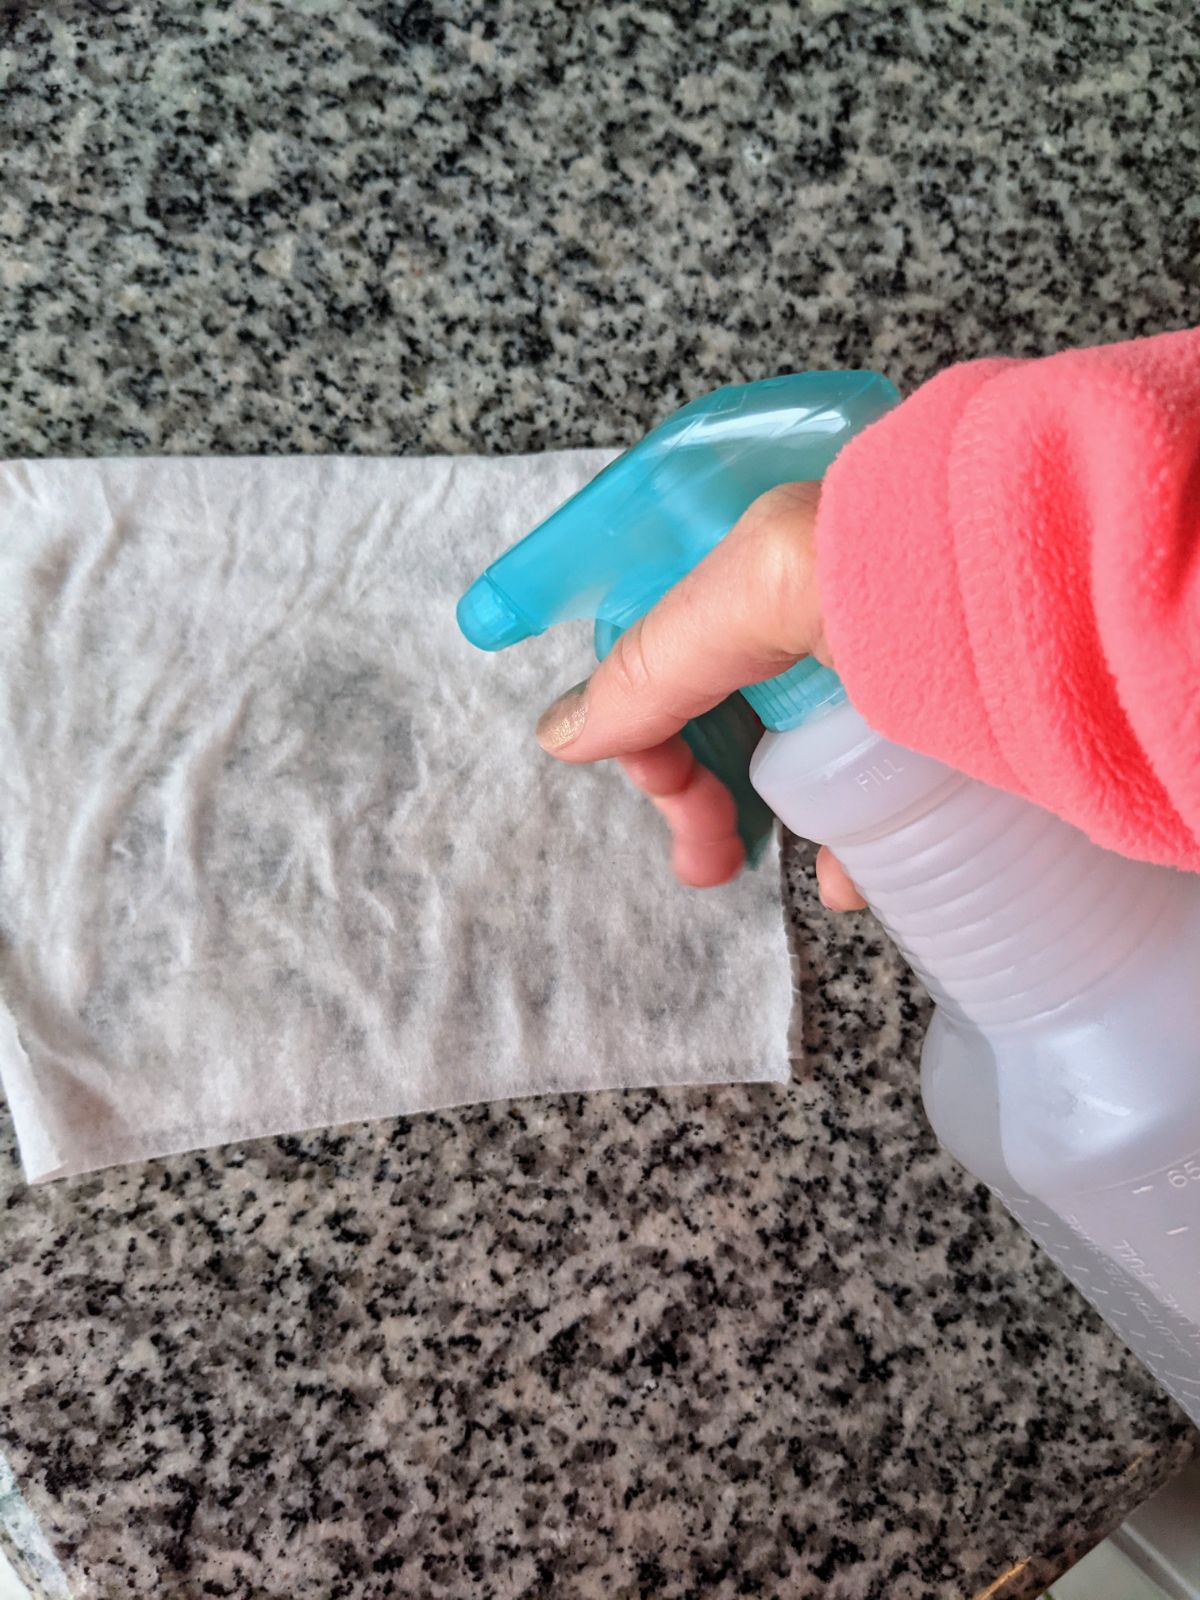 Woman's hand spraying a paper towel with tap water from a turquoise and white spray bottle